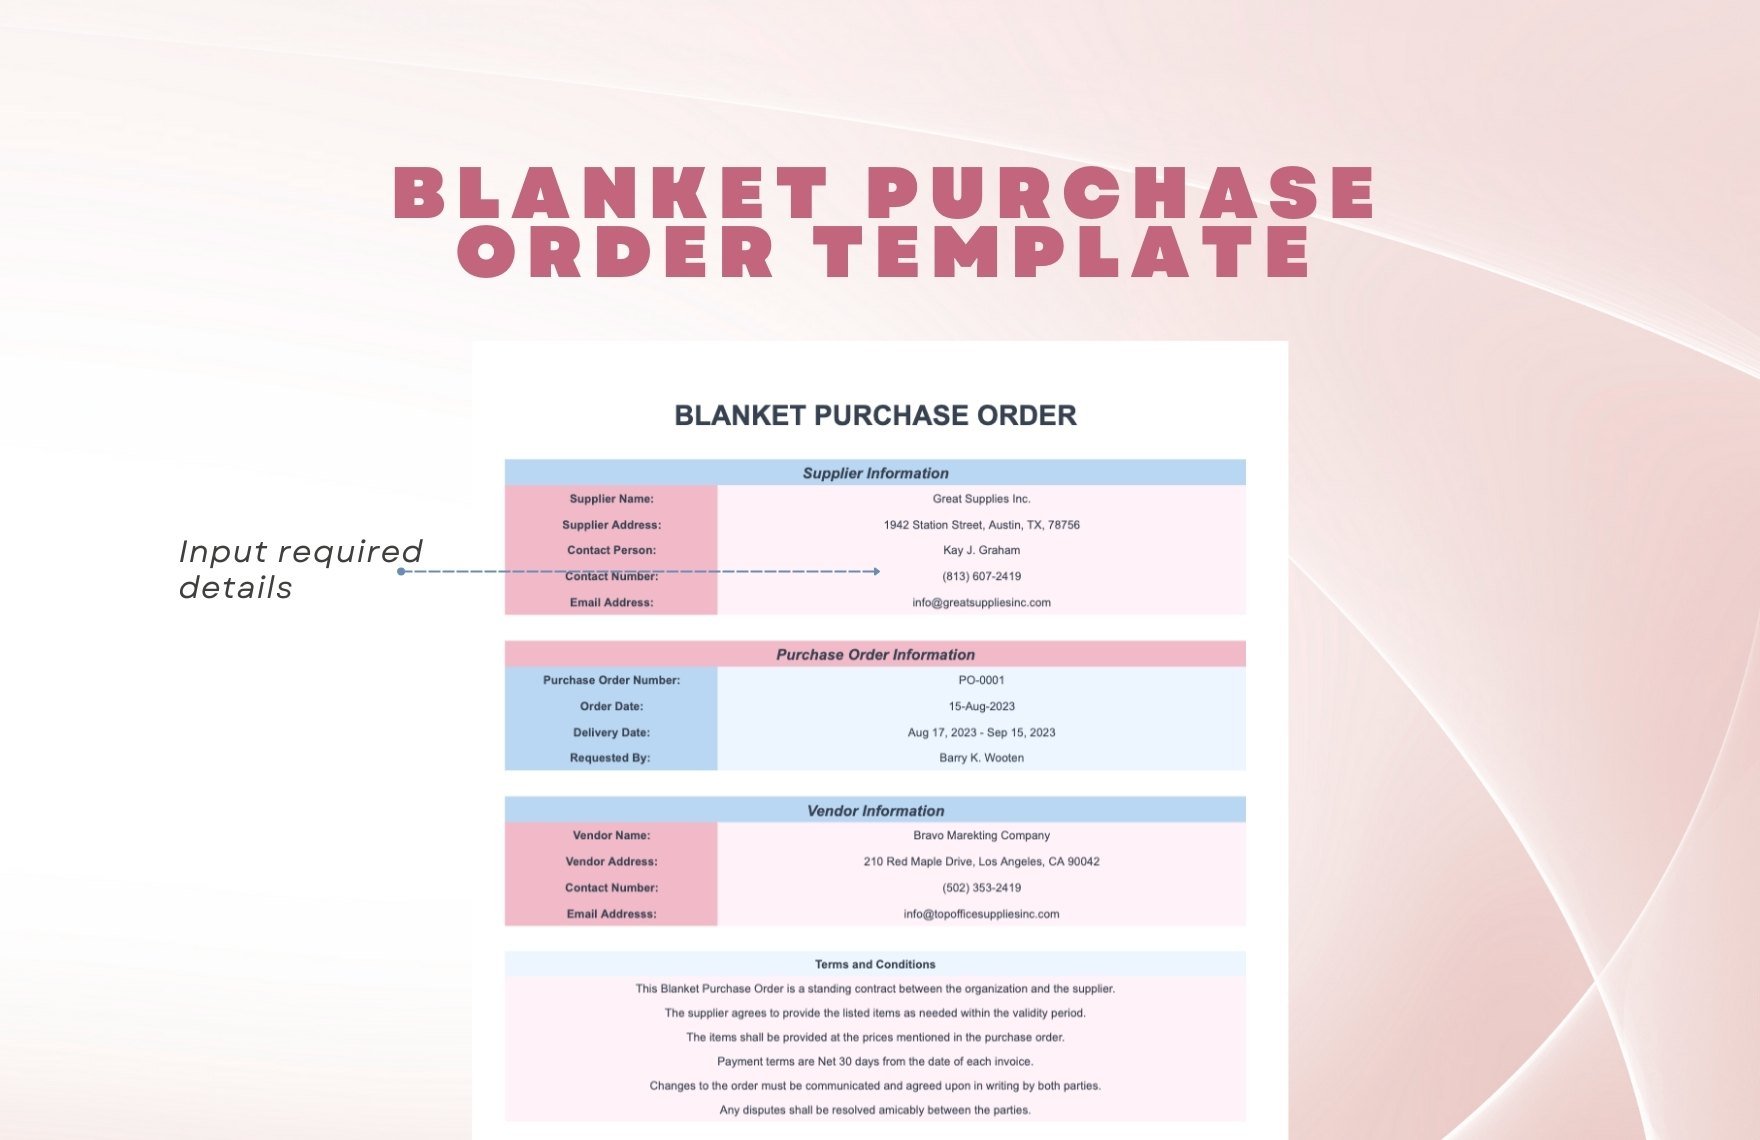 Blanket Purchase Order Template